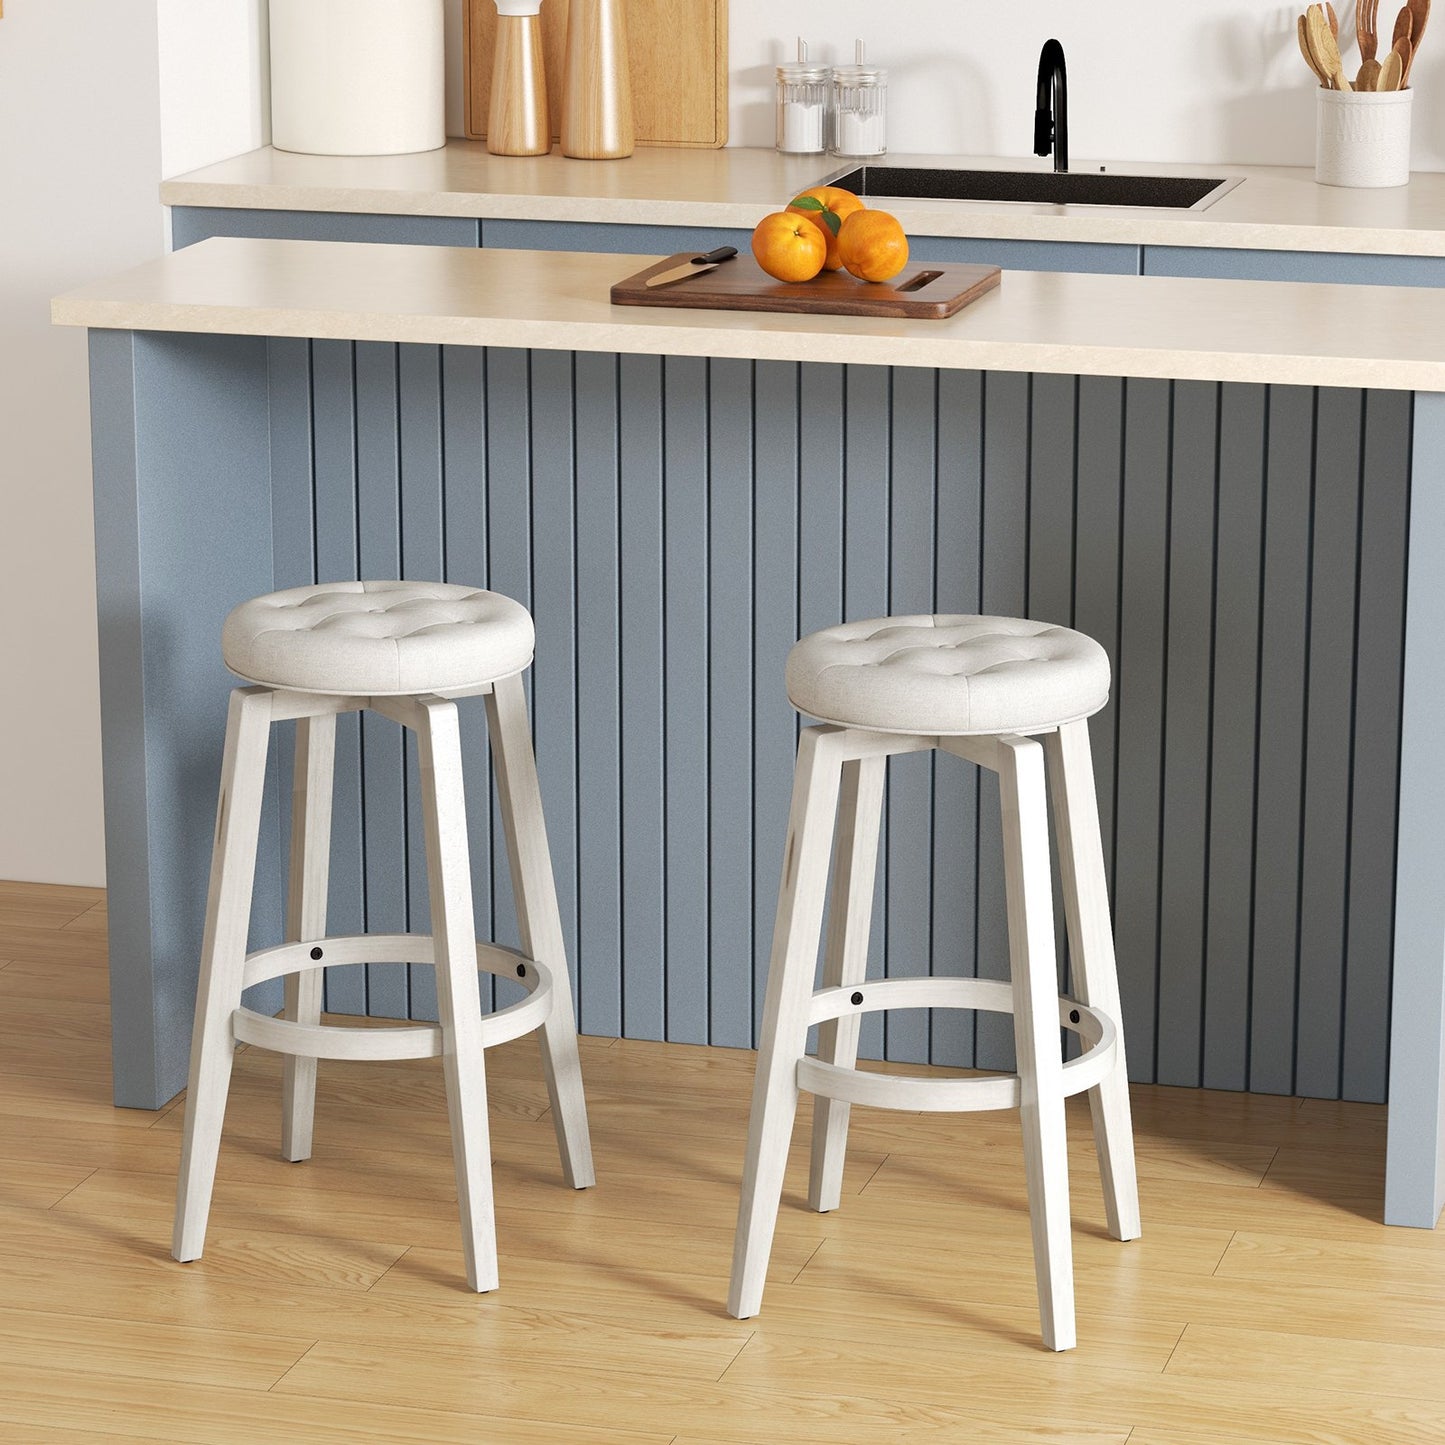 360° Swivel Upholstered Rubberwood Frame Bar Stool Set of 2 with Footrest-29 inches, White